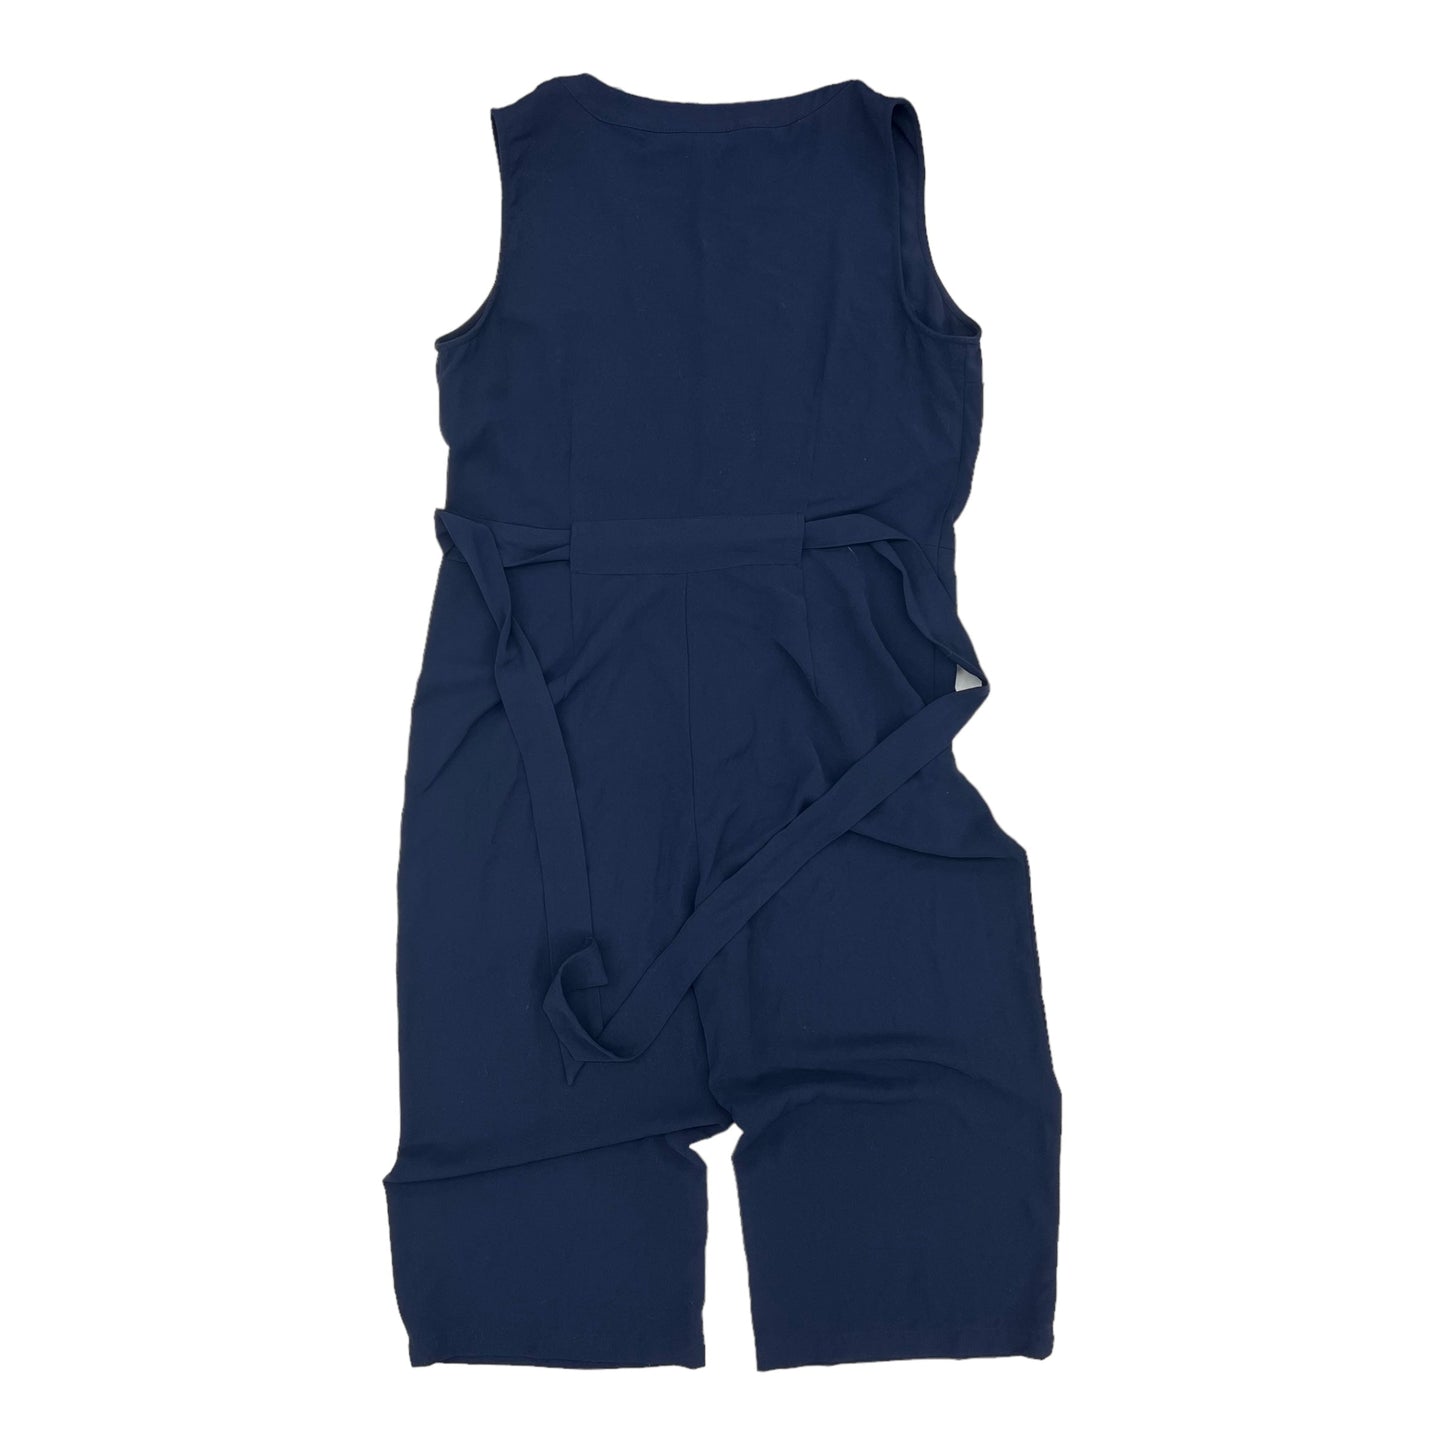 BLUE A NEW DAY JUMPSUIT, Size 2X